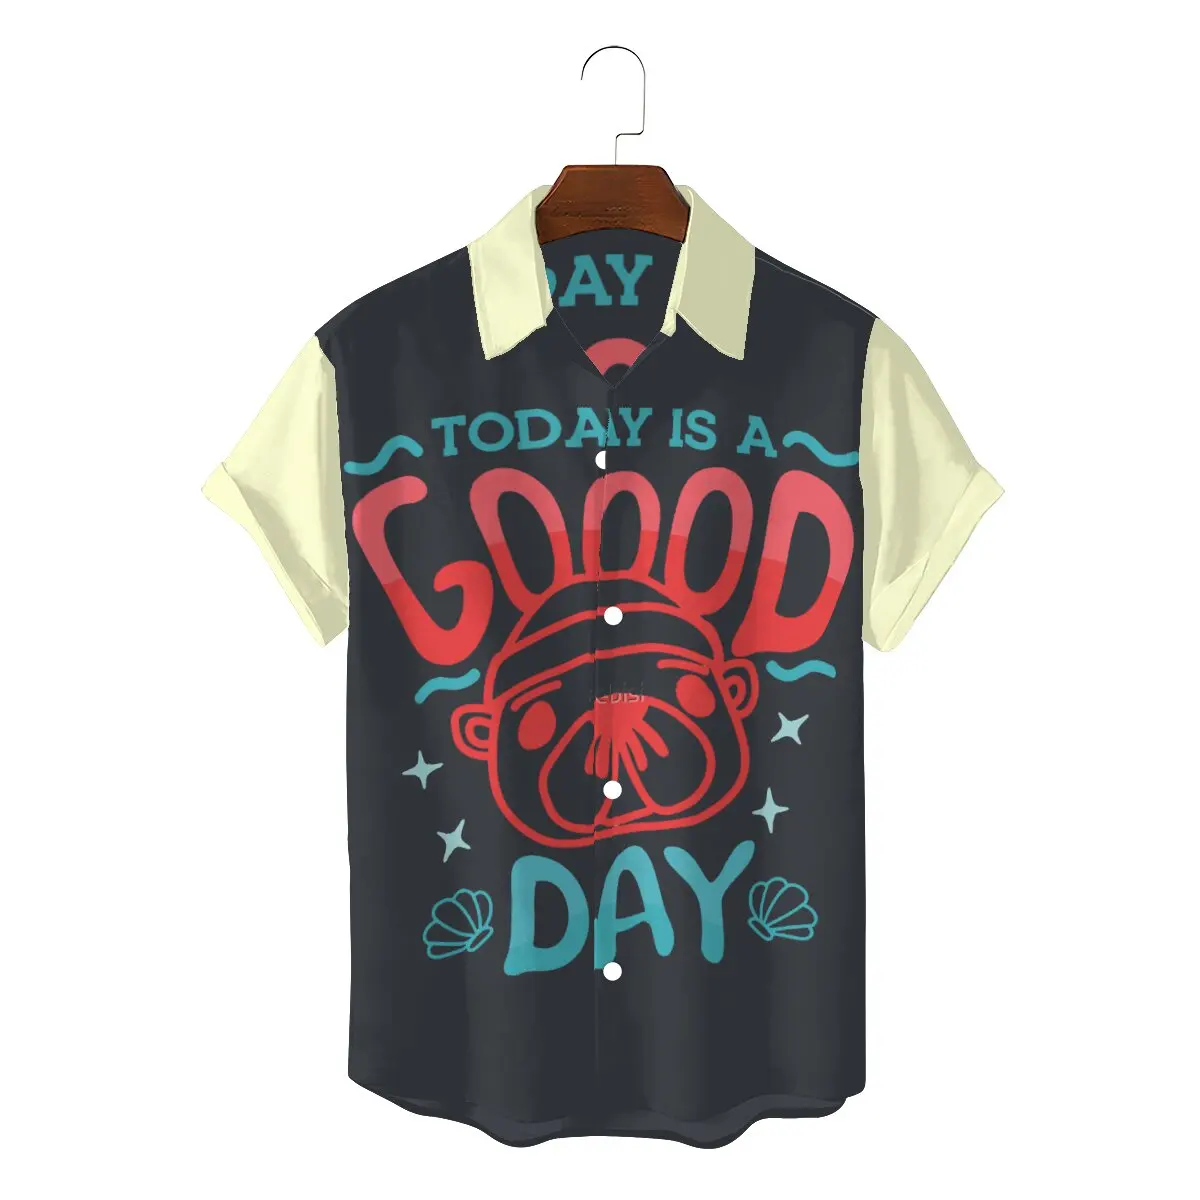 

Pascal Good Day Men Hawaii Shirts Animal Crossing Pocket Camp Square Neck Tops 3D Shirt Funny Top Quality Birthday Gifts